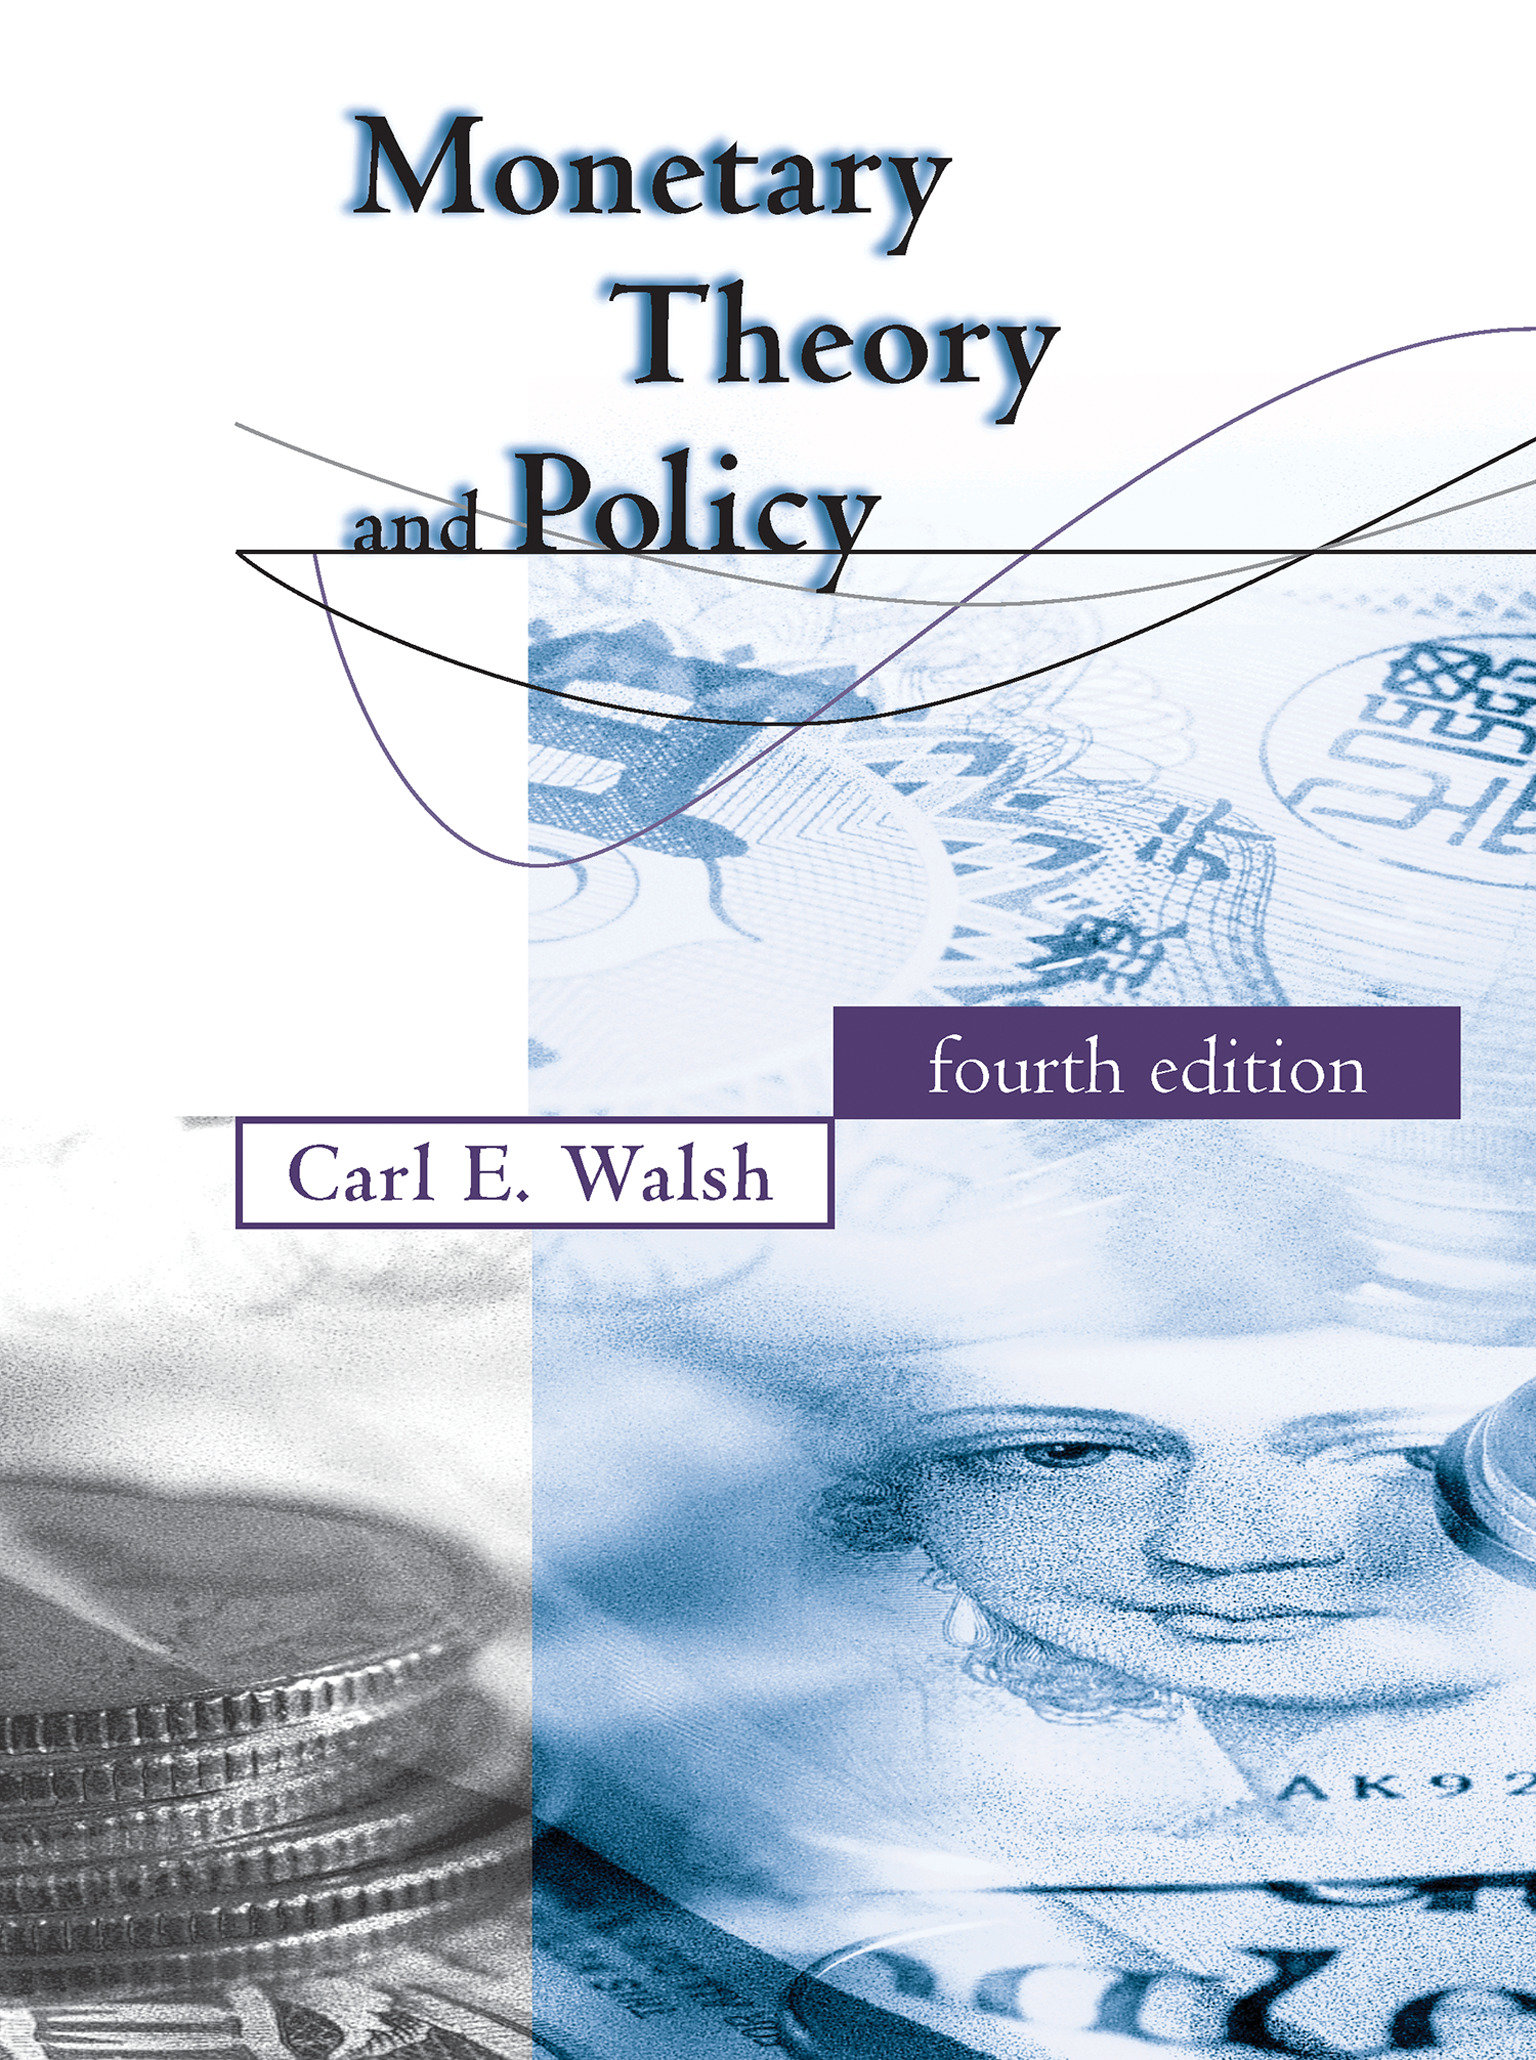 Monetary Theory And Policy, Fourth Edition (Hardcover Book)